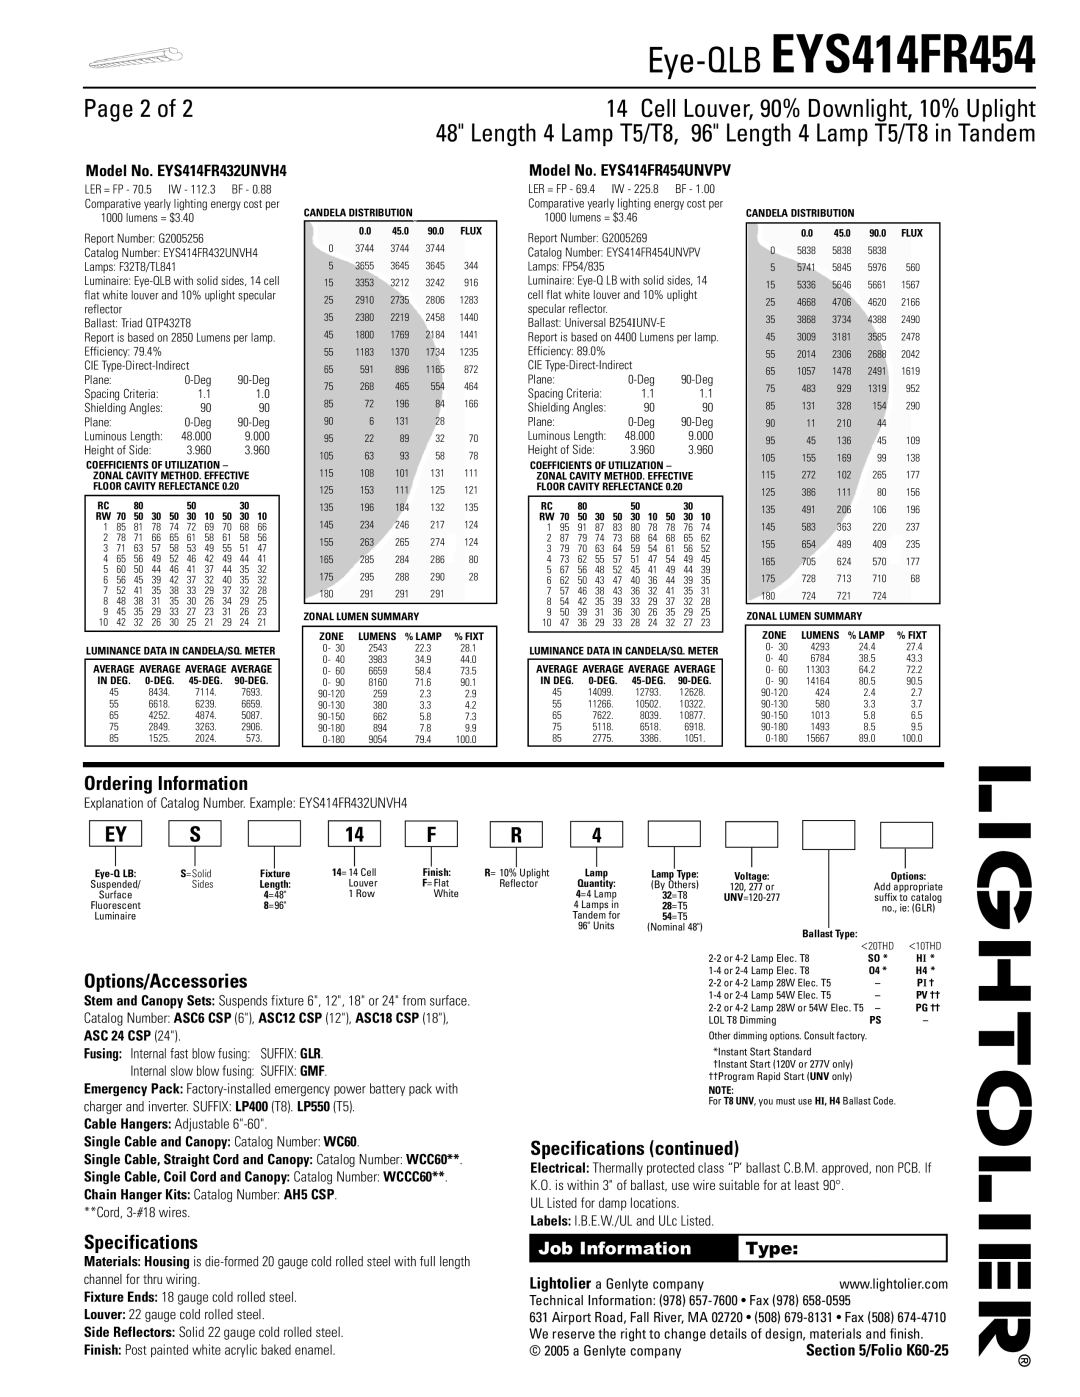 Lightolier EYS414FR454 Page 2 of, Ordering Information, Options/Accessories, Specifications continued, Job Information 